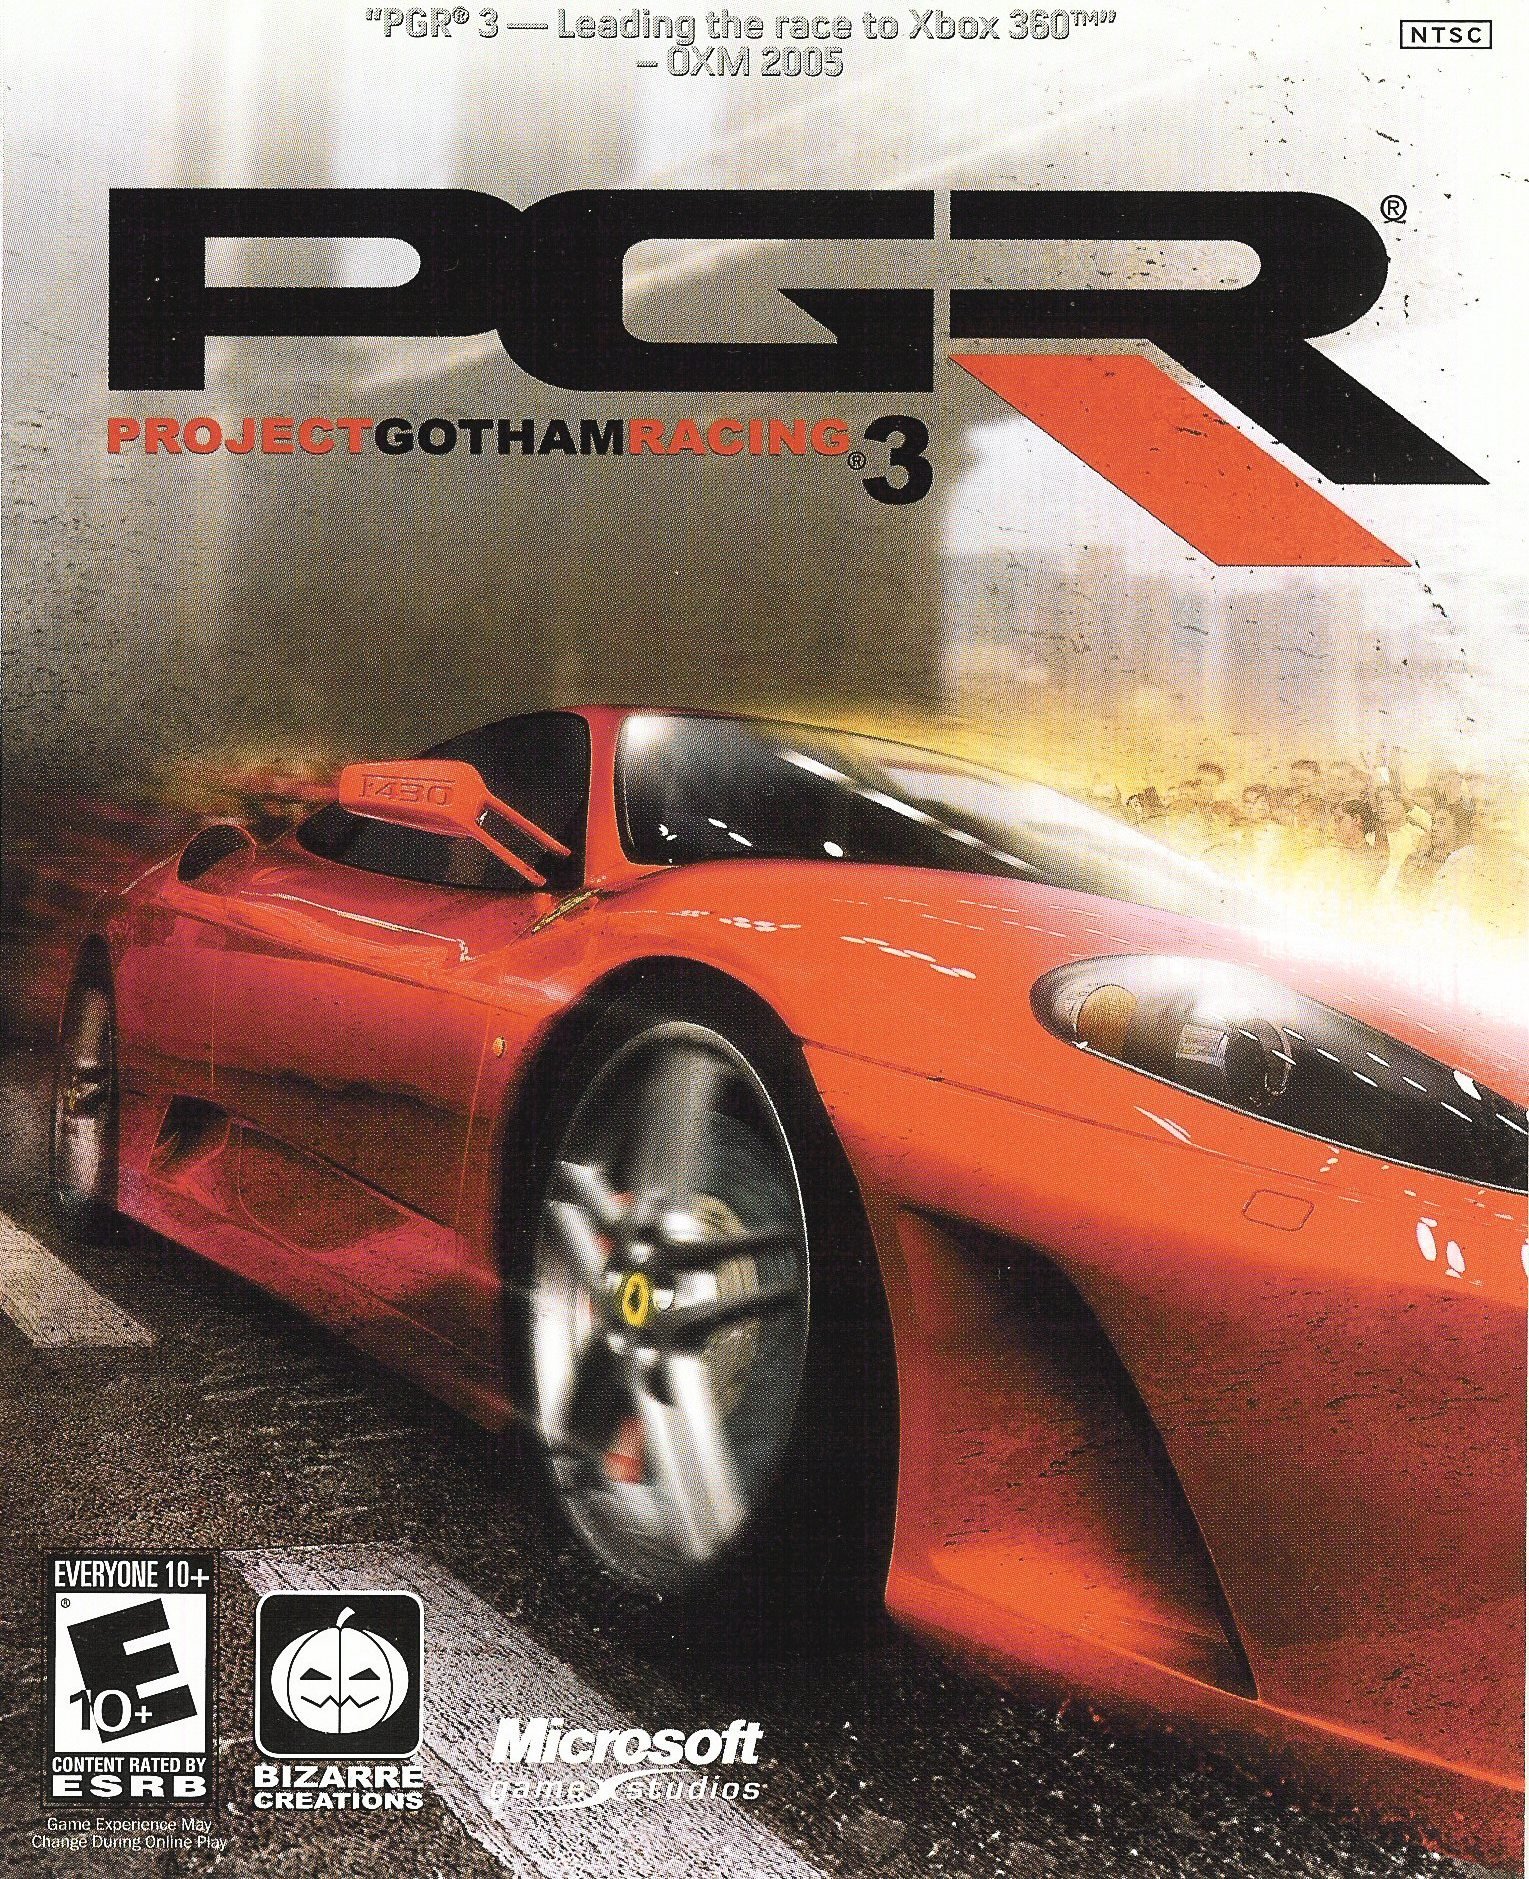 Image of Project Gotham Racing 3